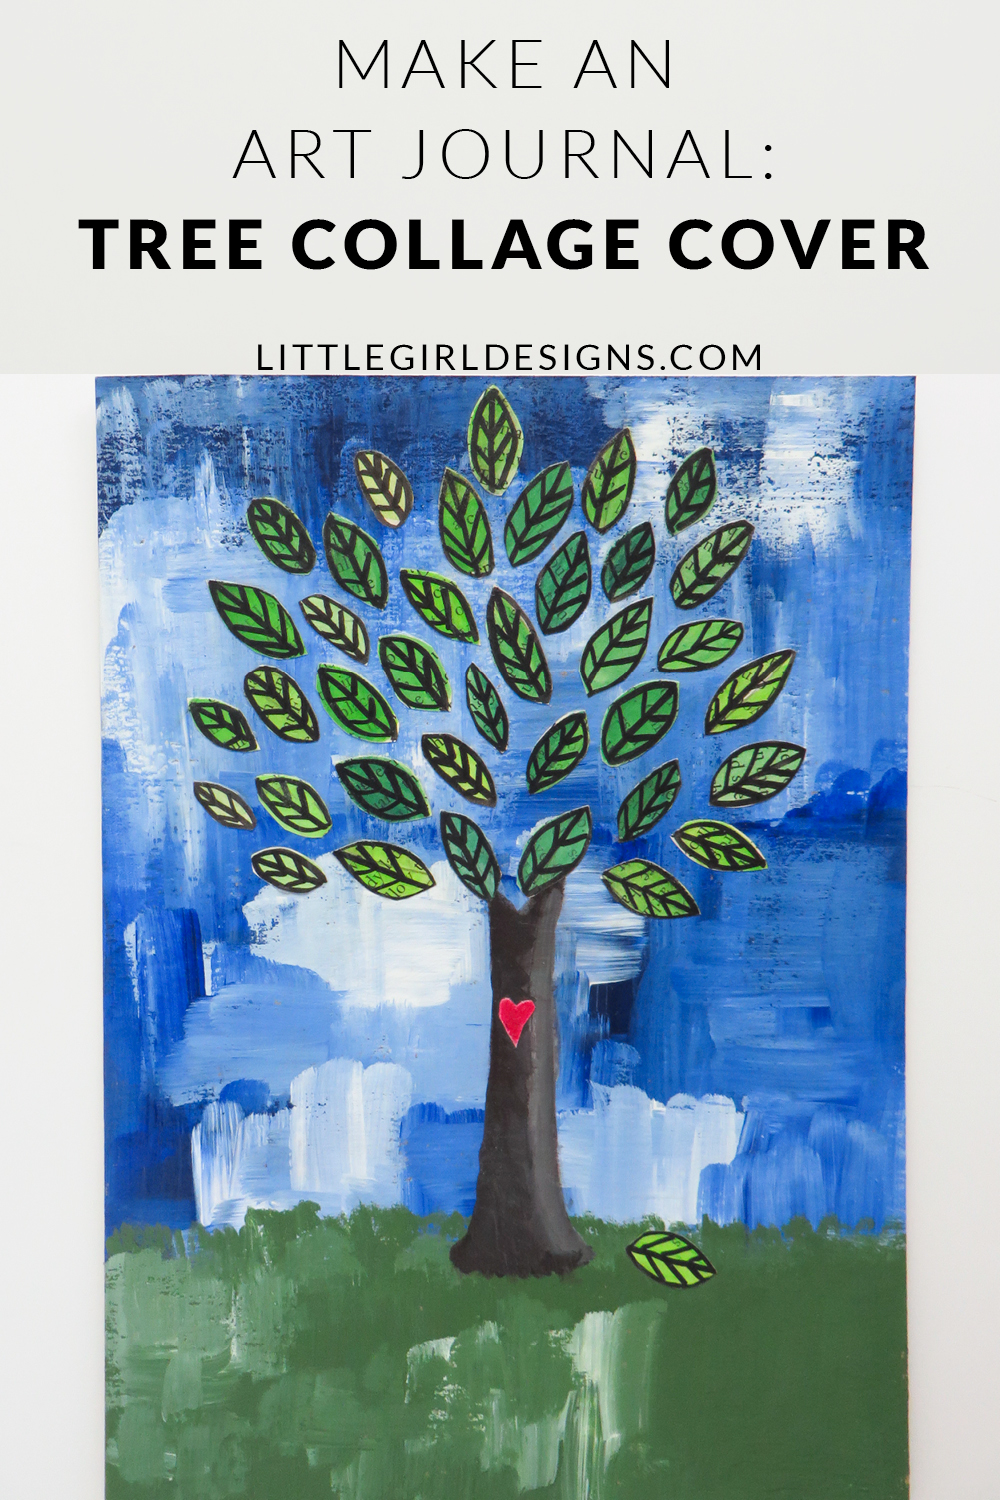 Make an Art Journal: Tree Collage Cover